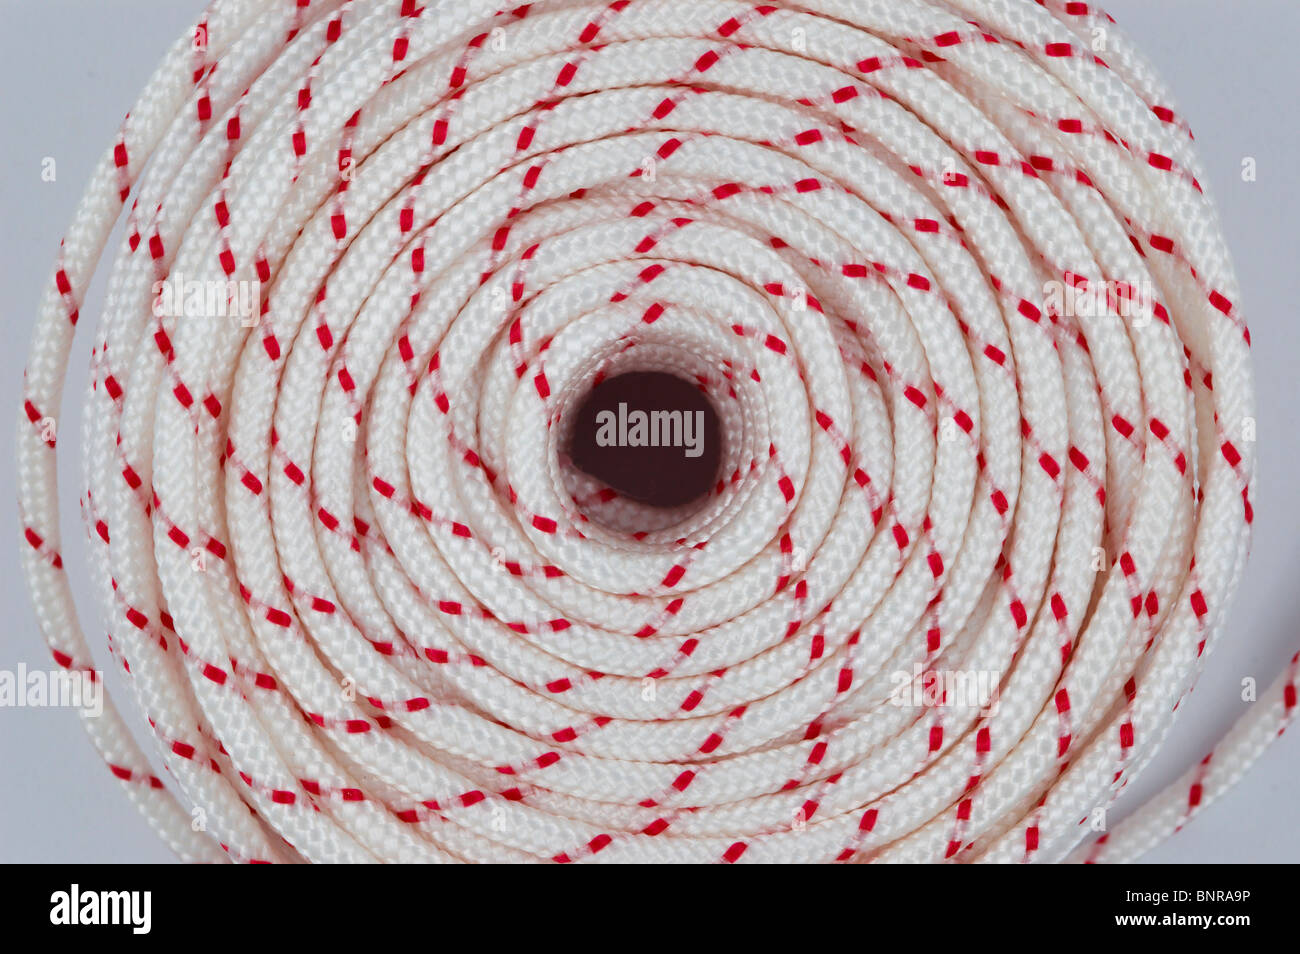 Bundled Nylon Rope, to be used as a clothes line Stock Photo - Alamy